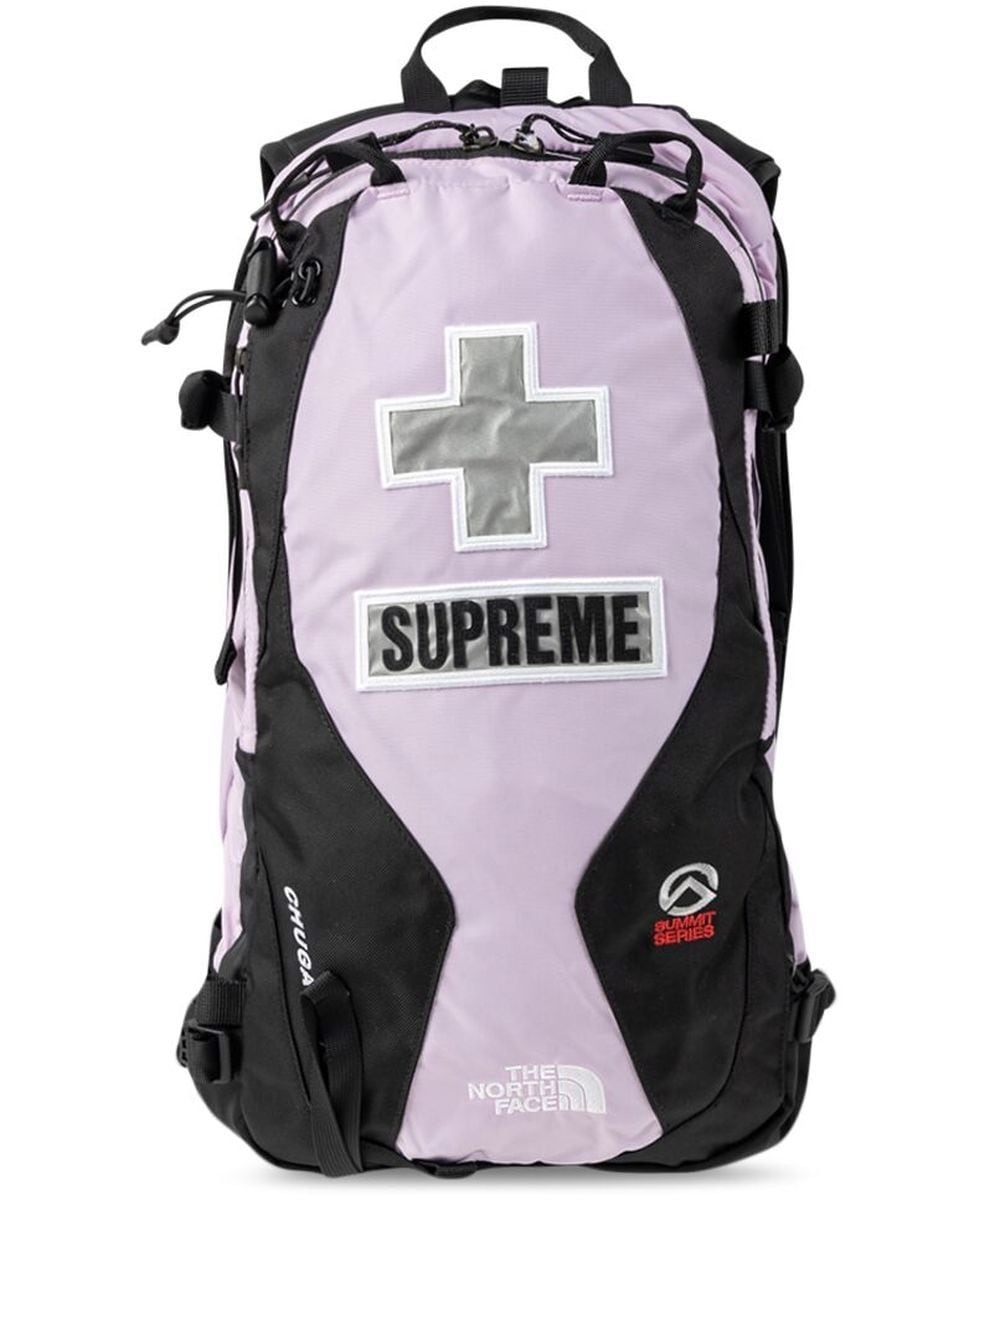 Supreme x The North Face Summit Series Rescue Chugach 16 backpack |  REVERSIBLE